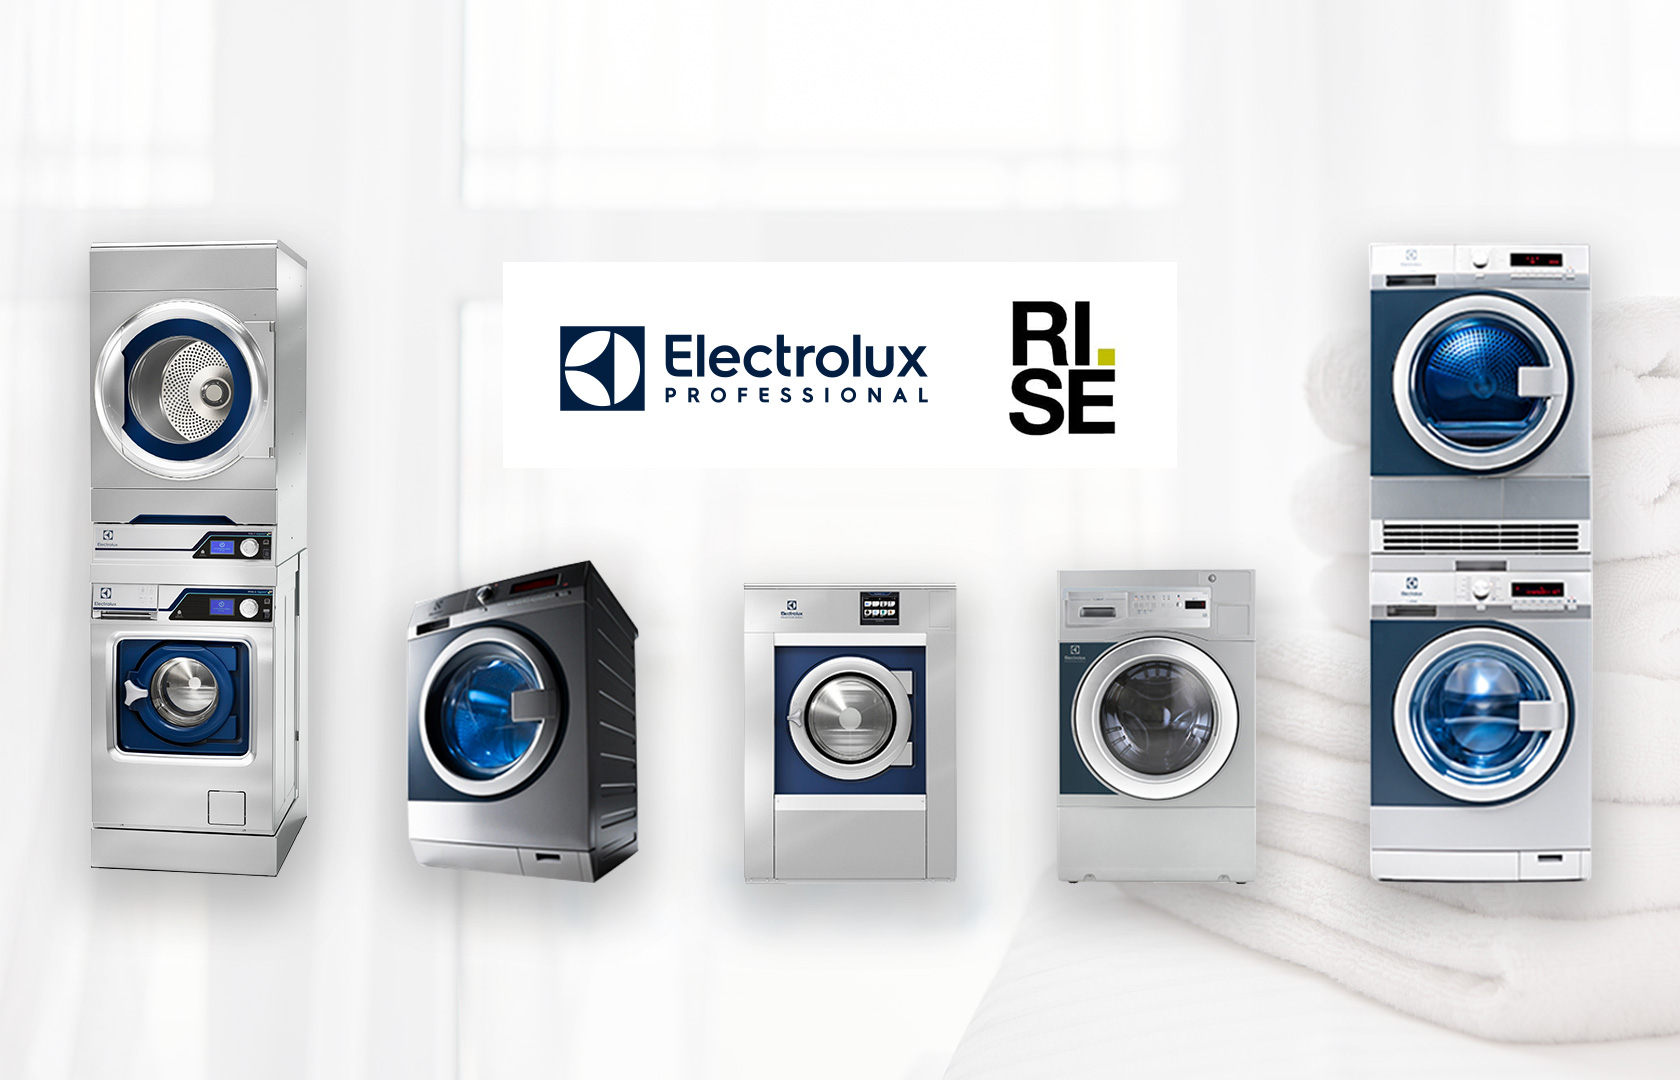 Richard Jay Electrolux Professional and RISE